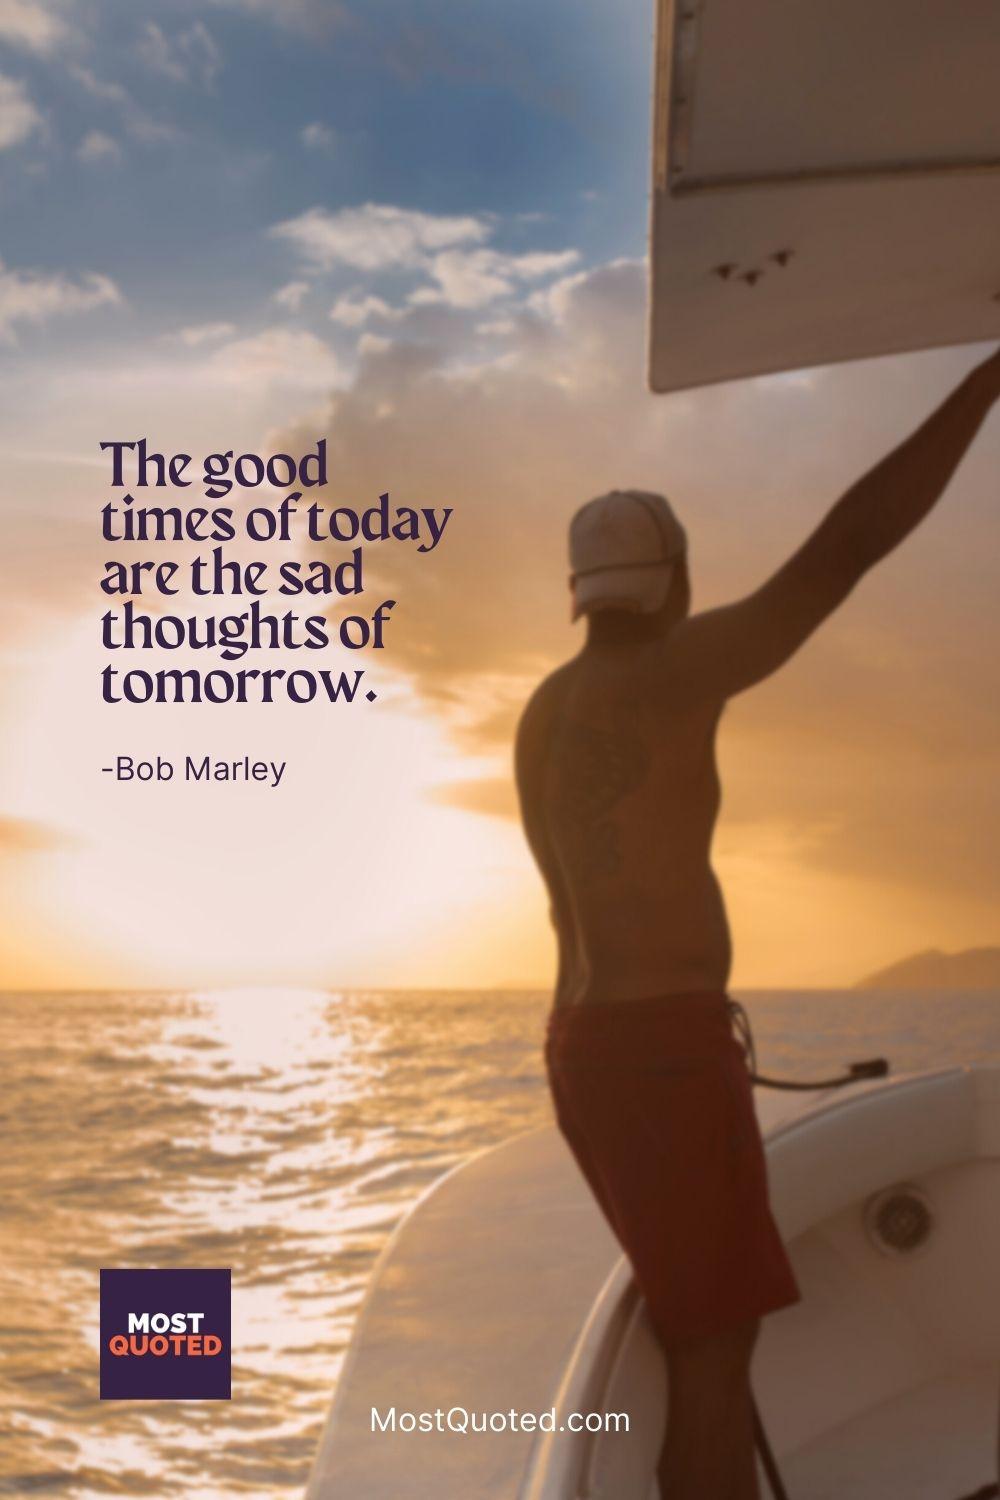 The good times of today are the sad thoughts of tomorrow. - Bob Marley